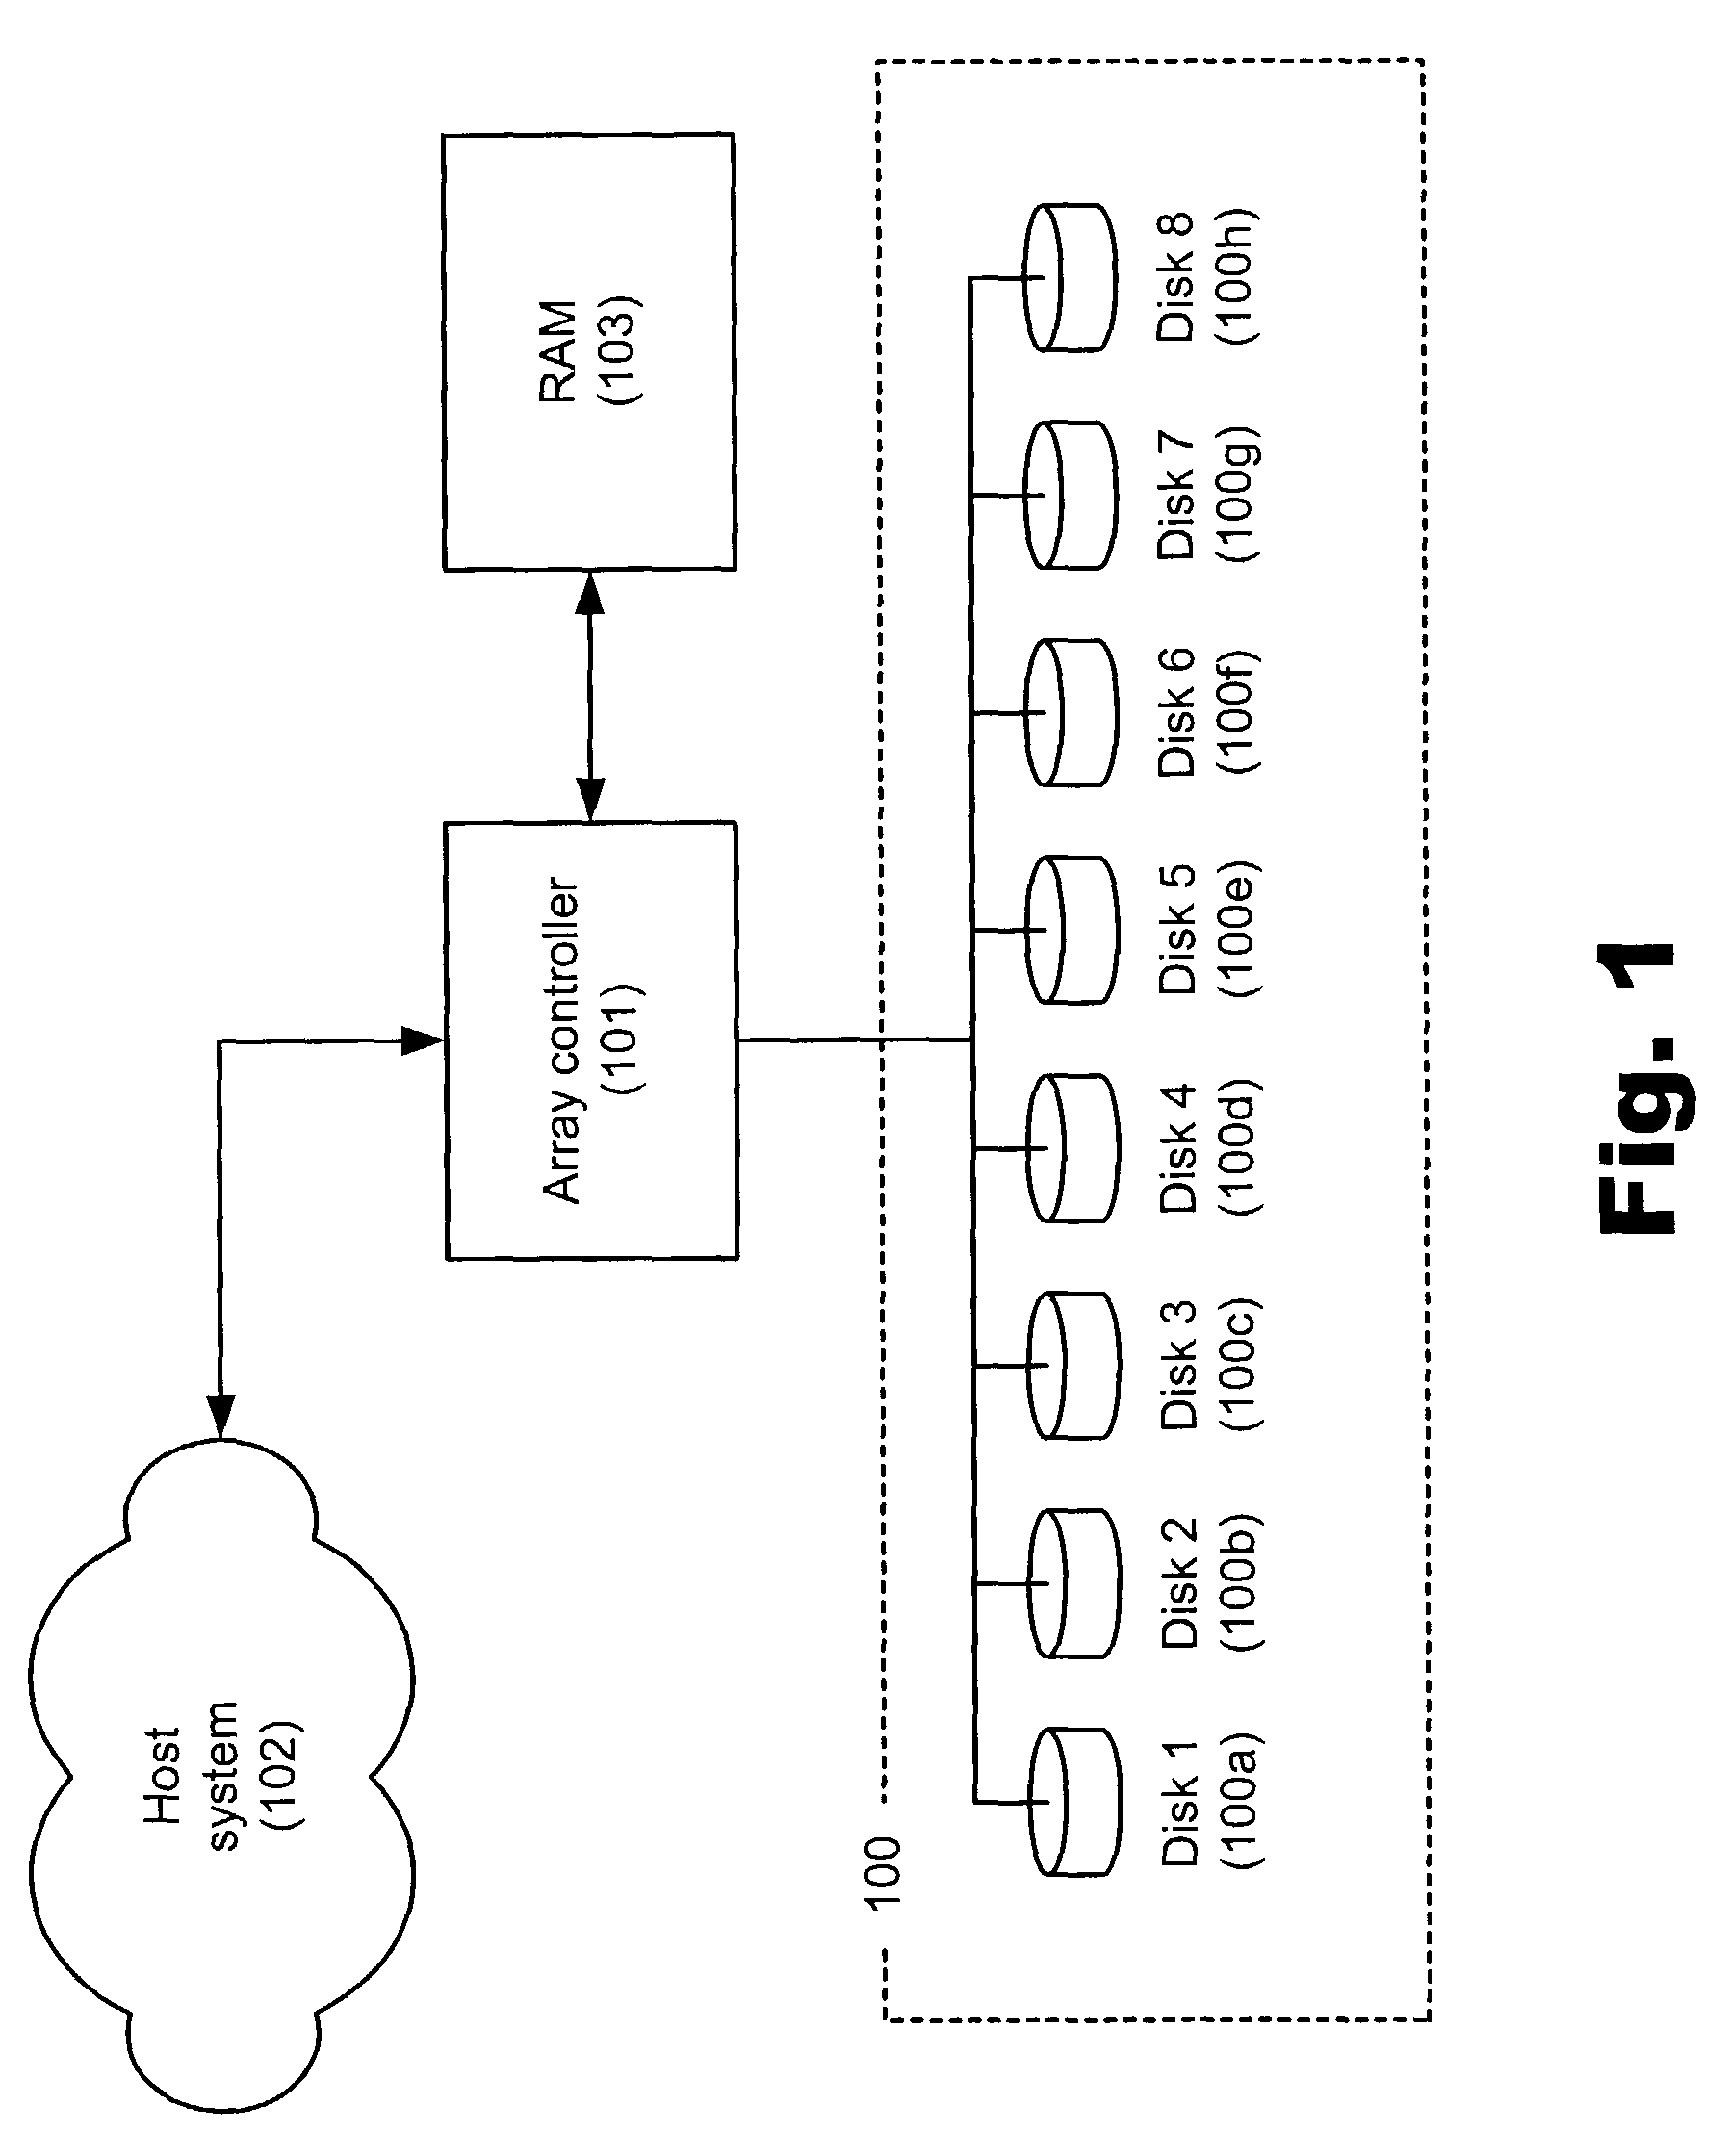 Manipulating data in a data storage device using an auxiliary memory device